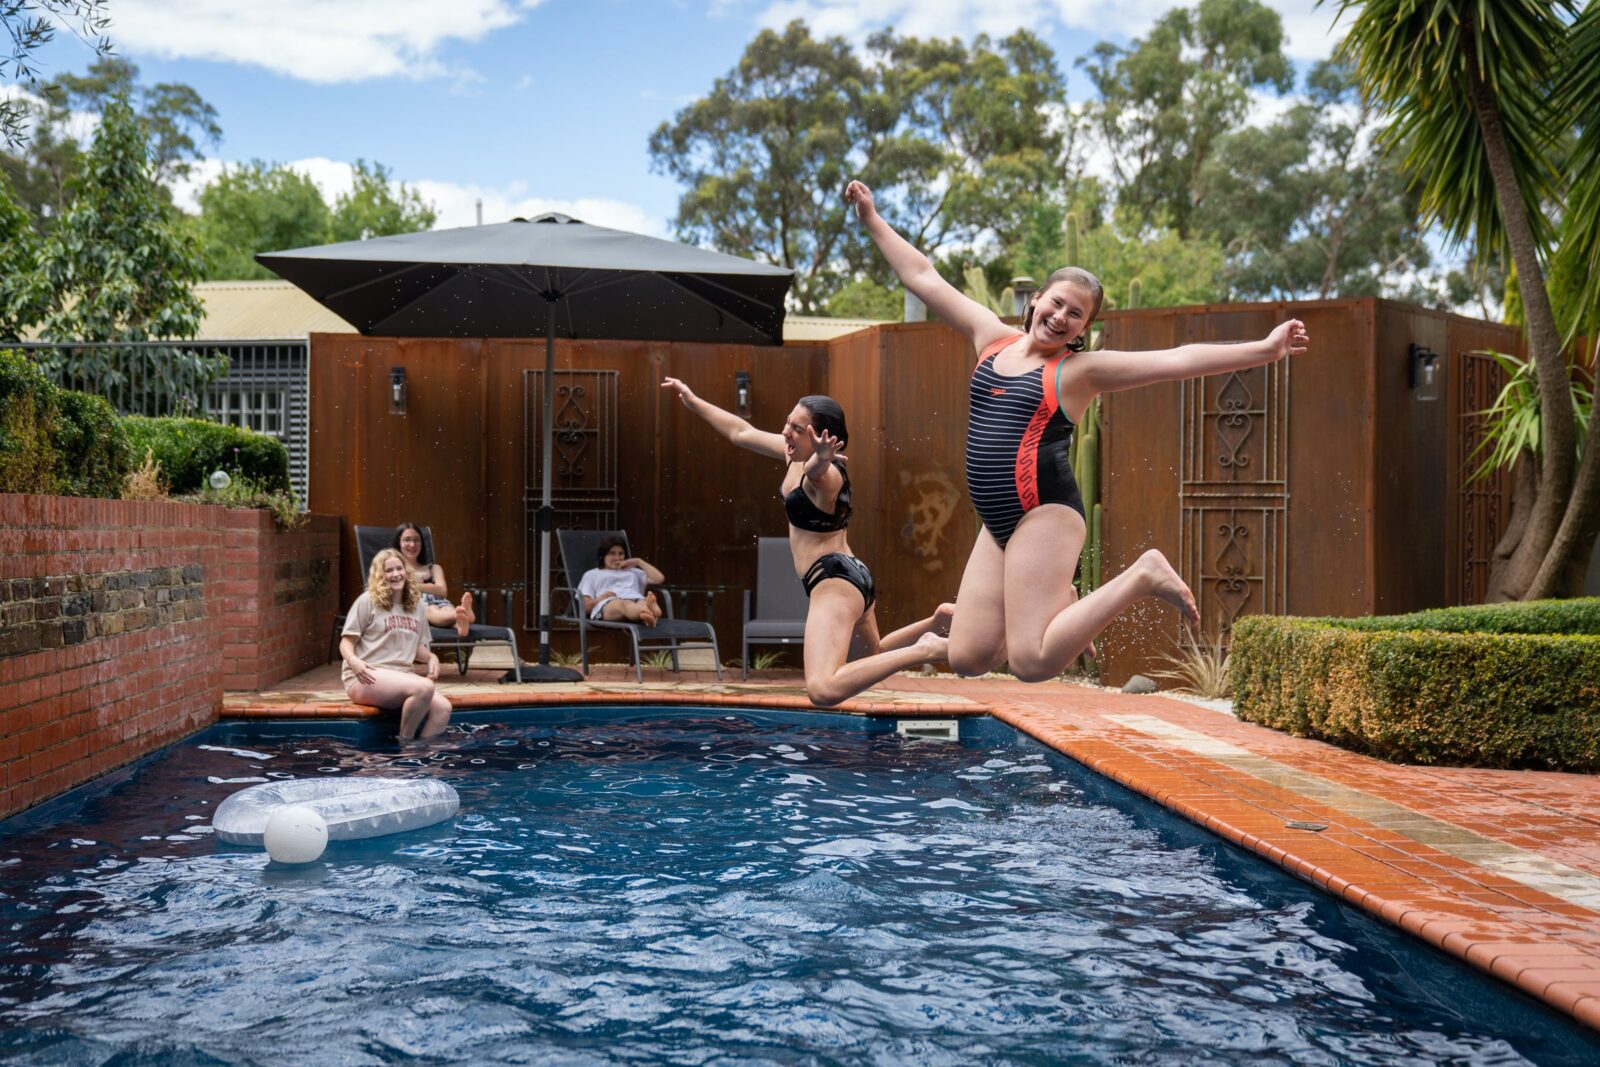 Yarra Valley accommodation with pool